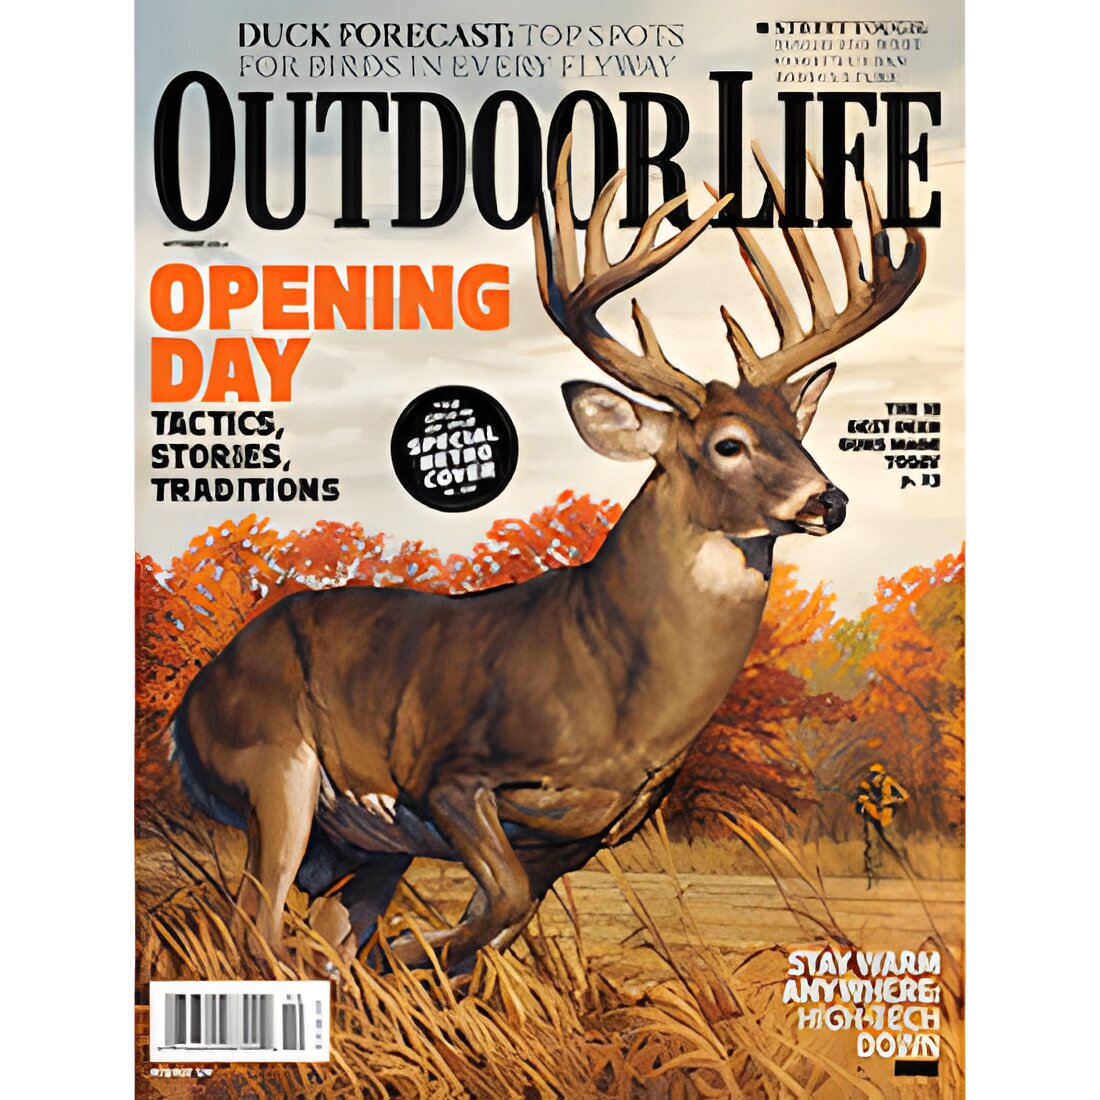 Free One Year Subscription To Outdoor Life Magazine